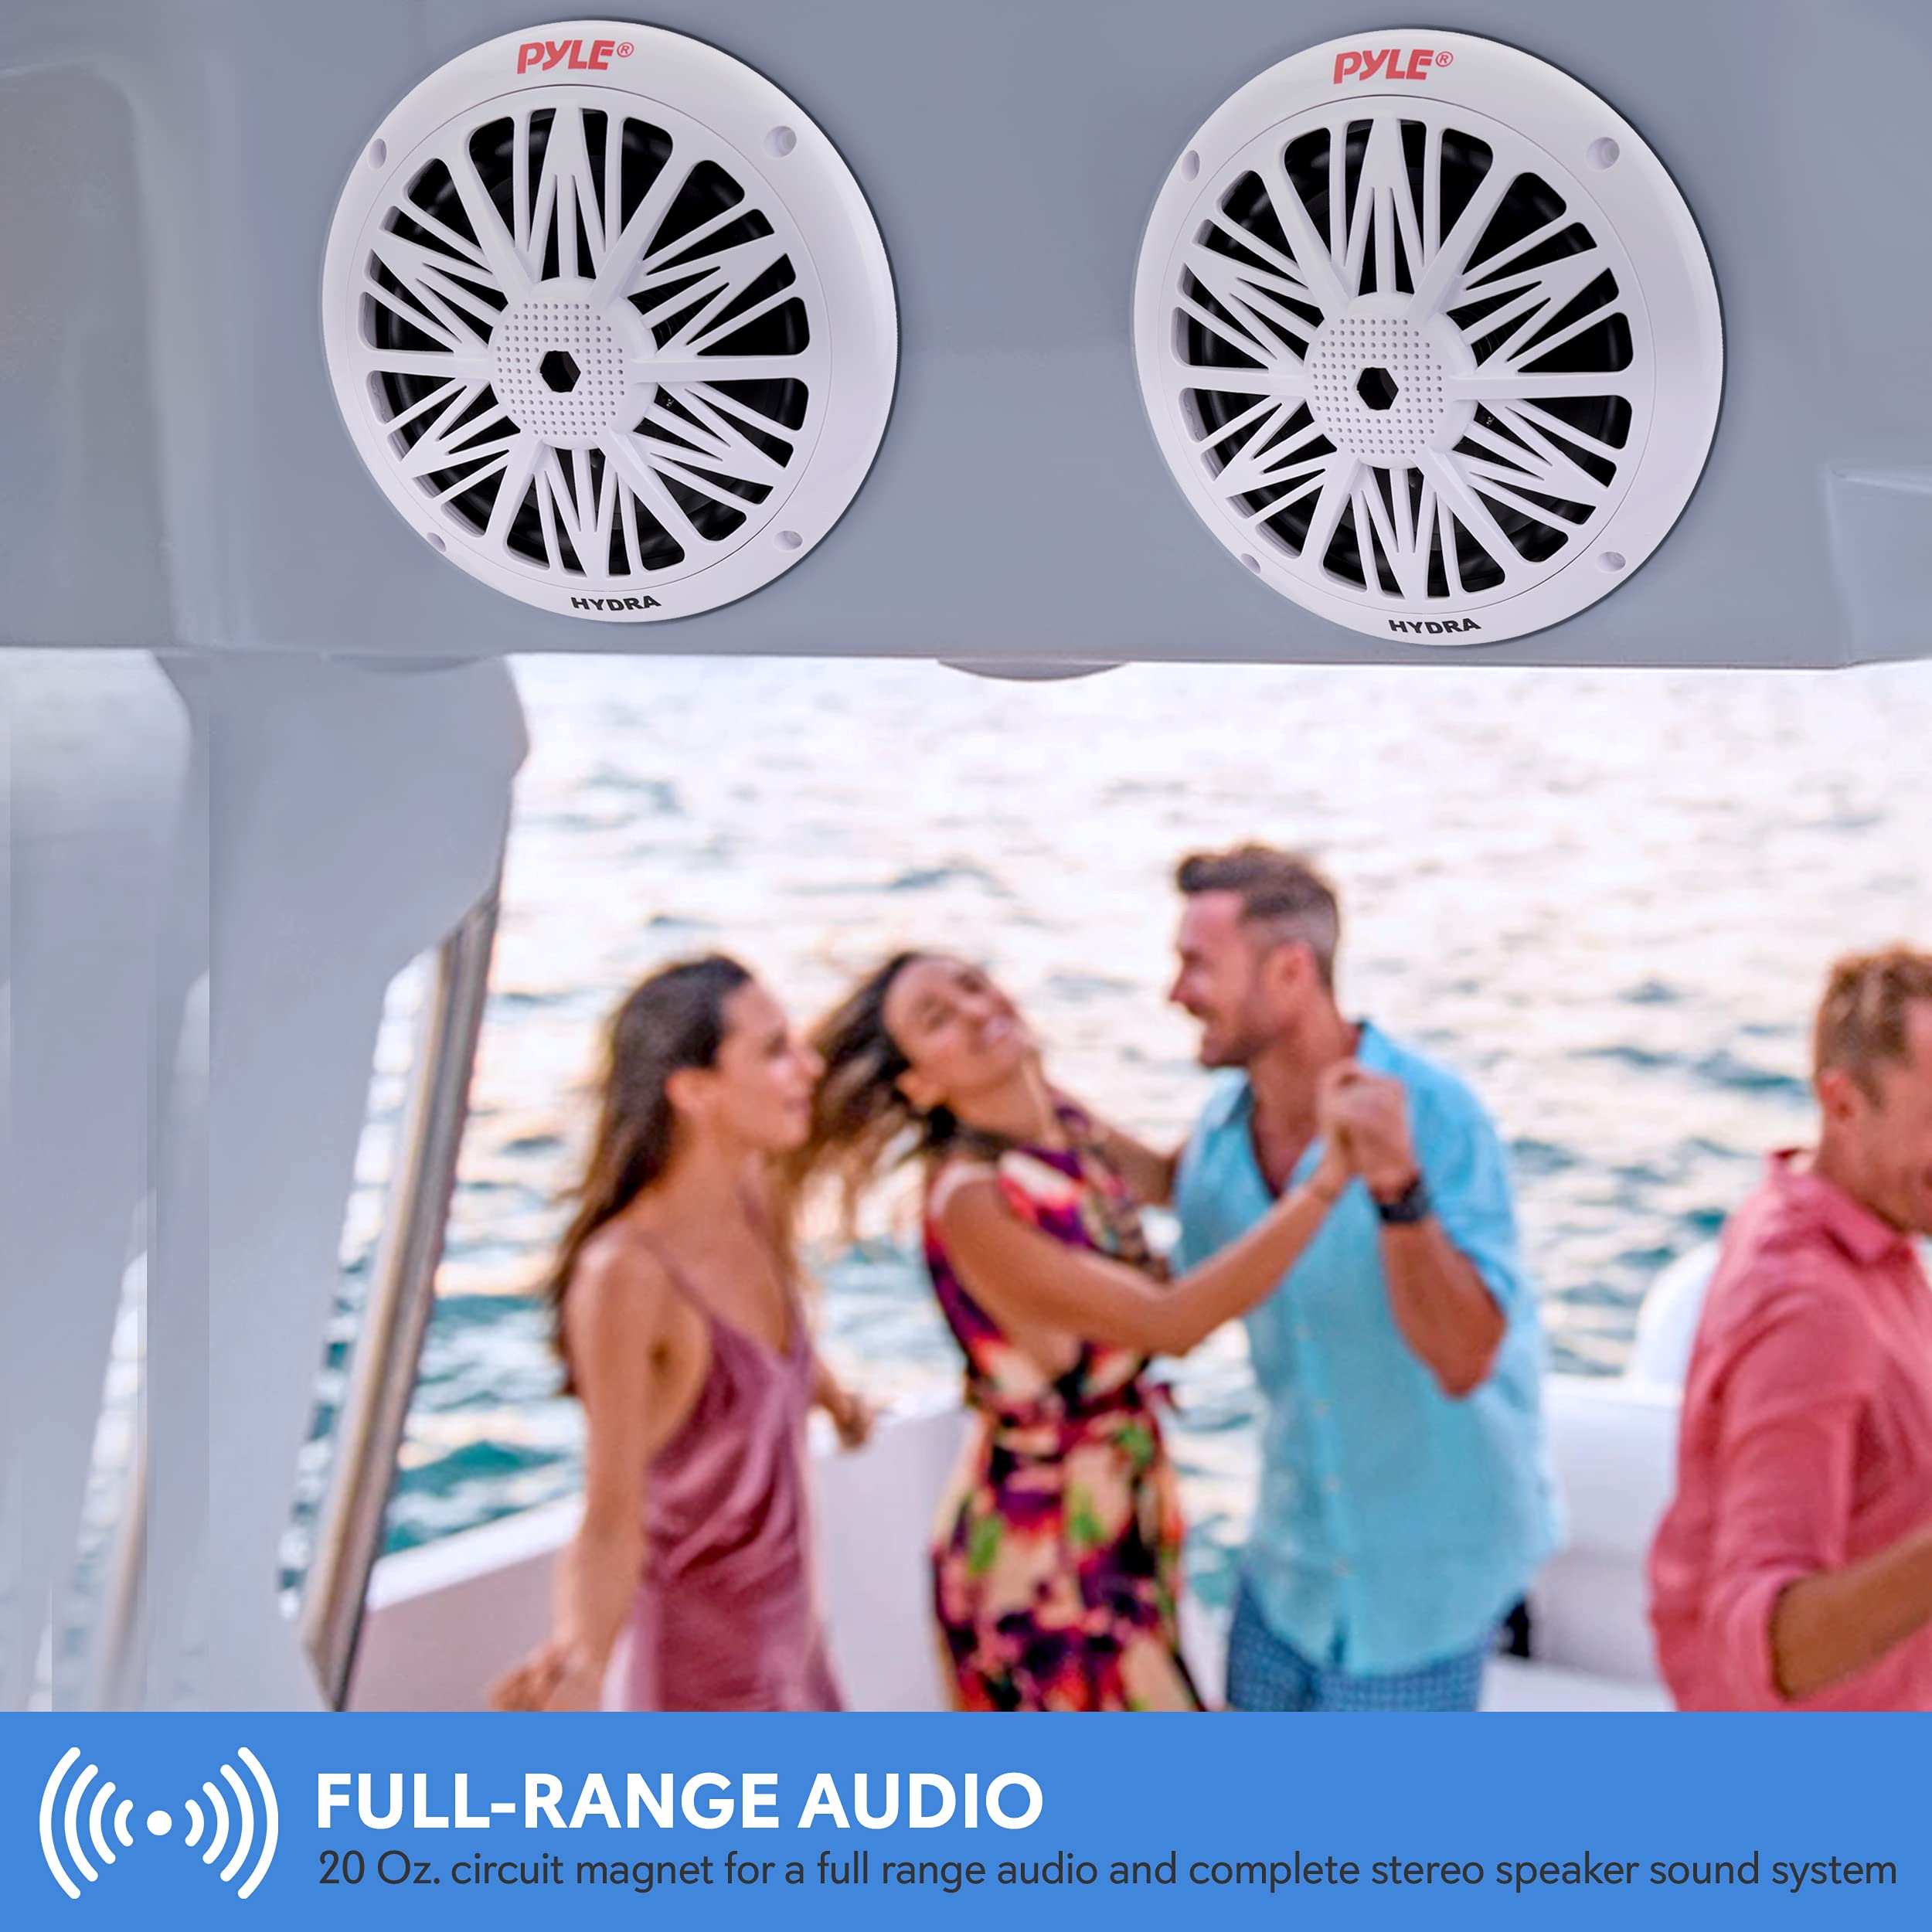 Pyle 6.5 Inch Dual Marine Speakers - 2 Way Waterproof and Weather Resistant Outdoor Audio Stereo Sound System with 200 Watt Power, Poly Carbon Cone and Butyl Rubber Surround - 1 Pair - PLMR62 (White)